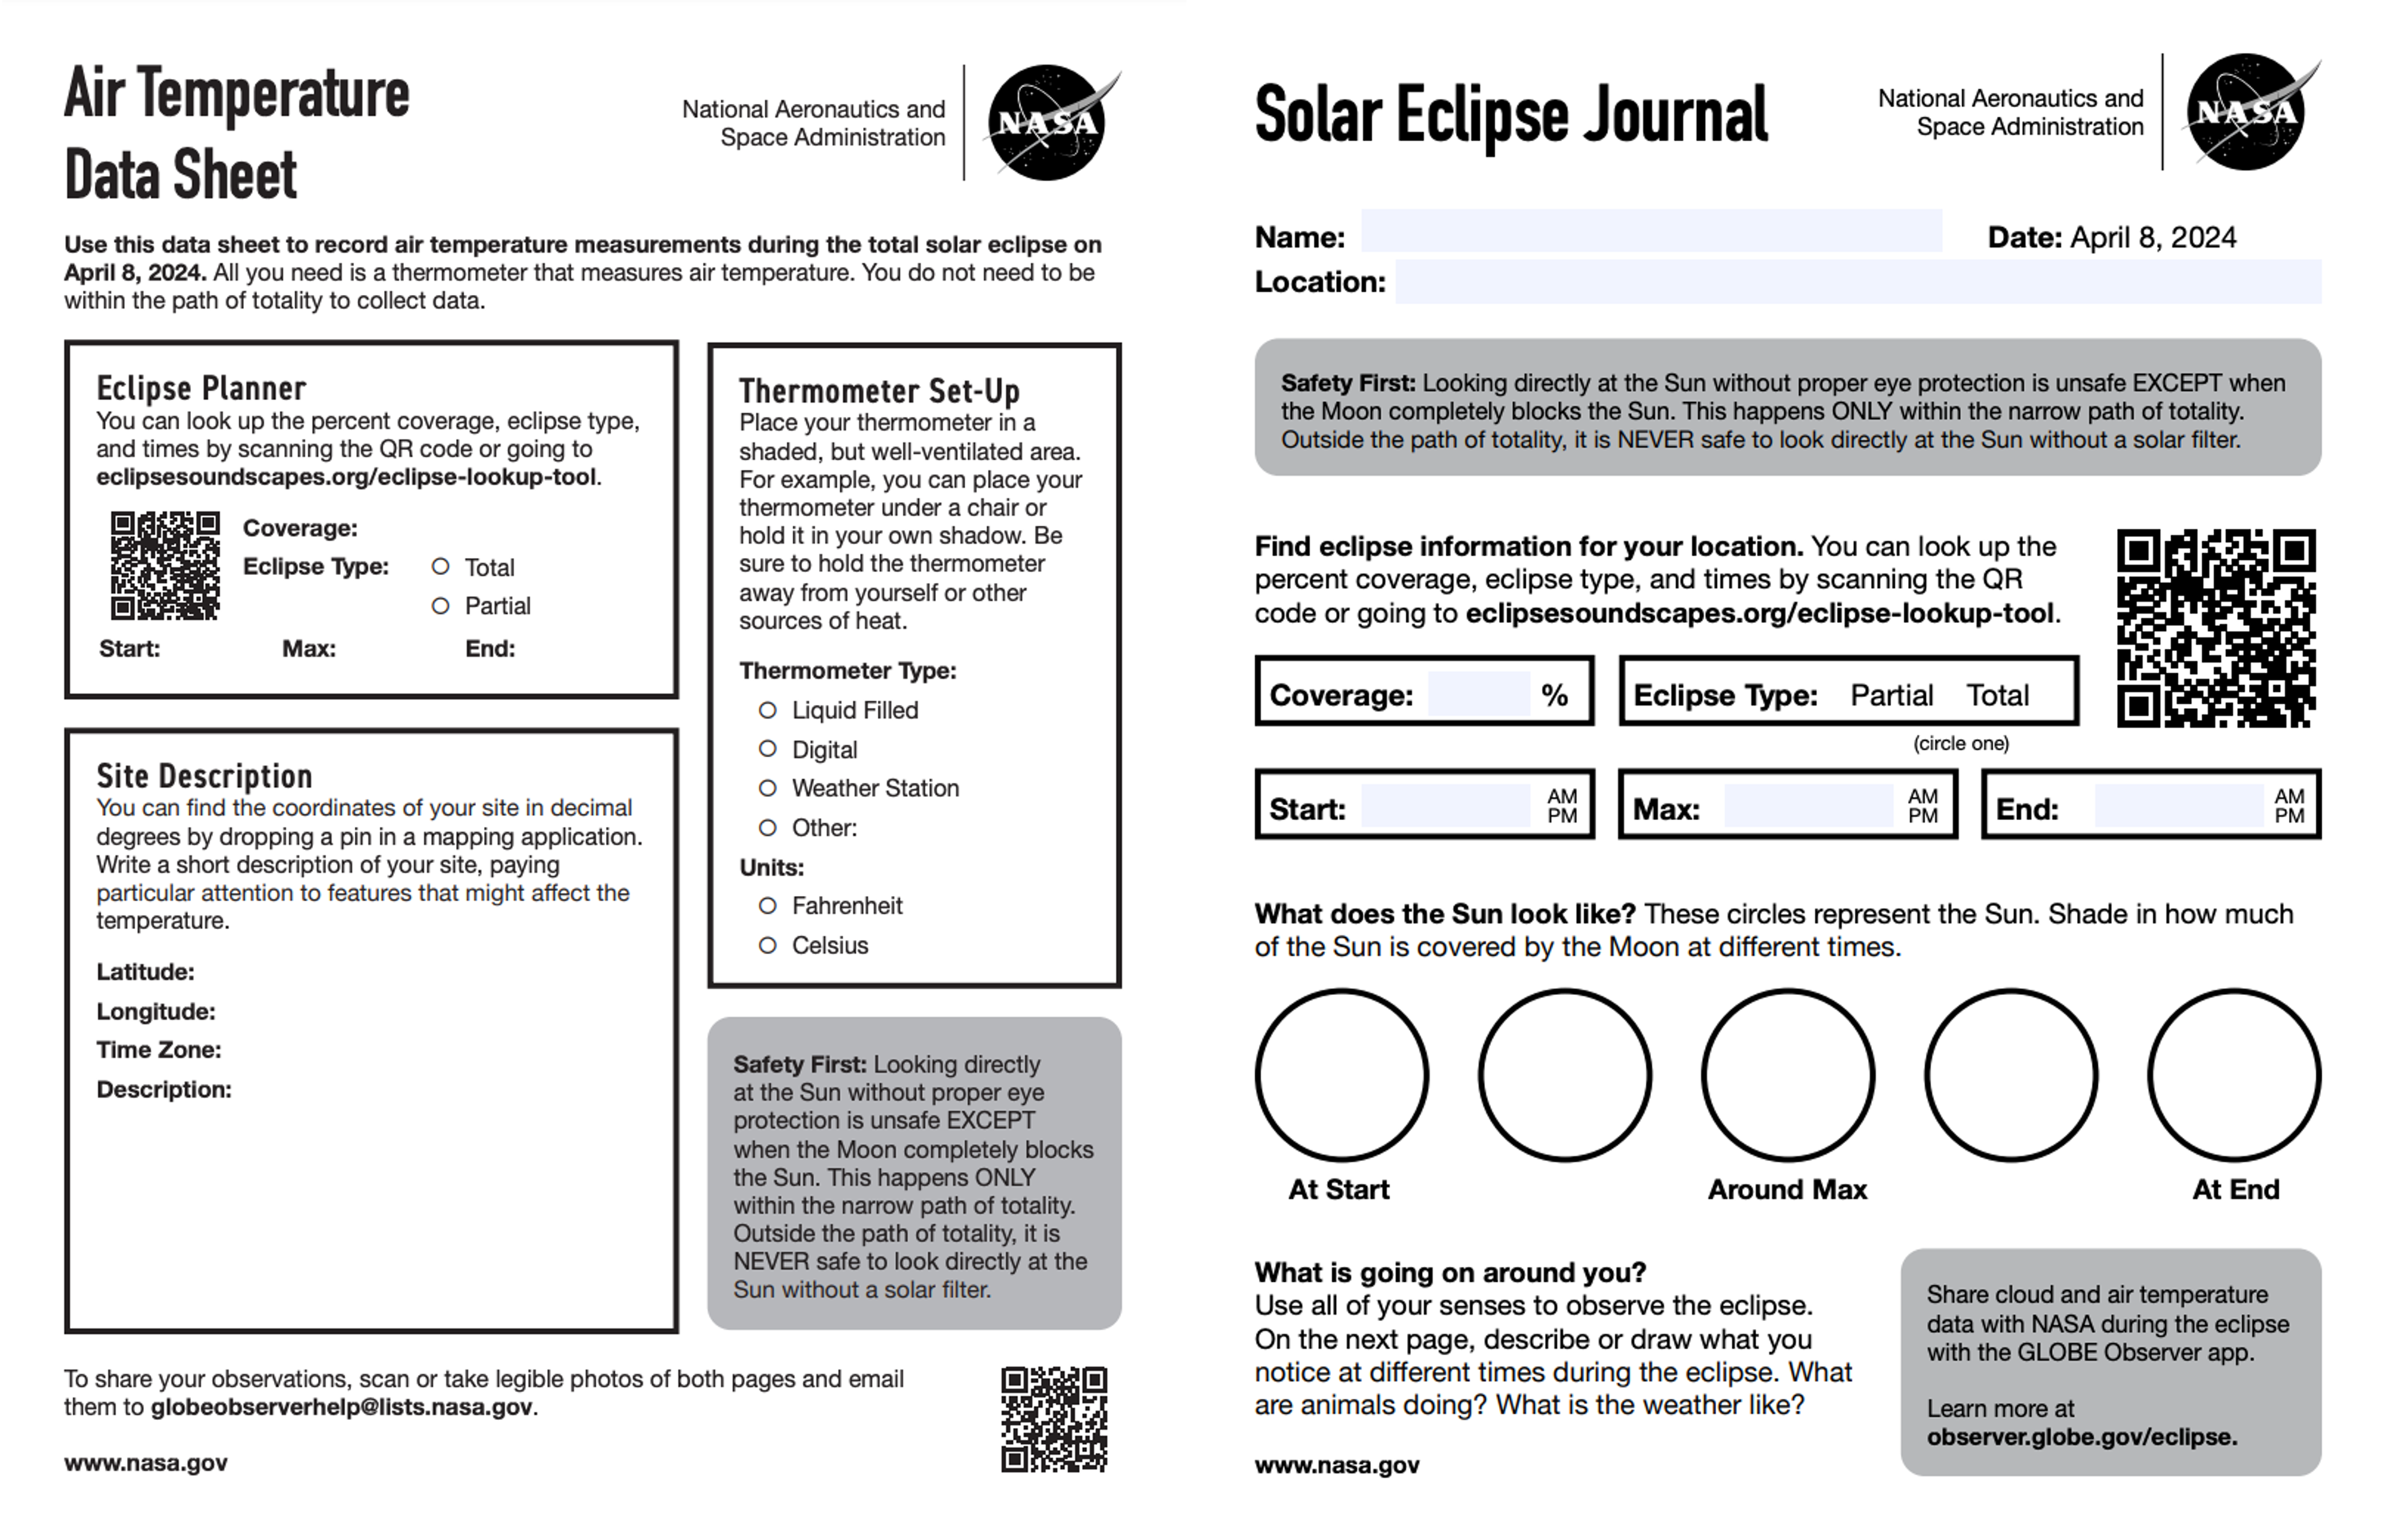 Screenshots of printable datasheets that can be used to record eclipse observations. On the left is the air temperature data sheet, and on the right is the solar eclipse journal. Both documents are available at https://observer.globe.gov/do-globe-observer/eclipse/resource-library in an accessible format. 